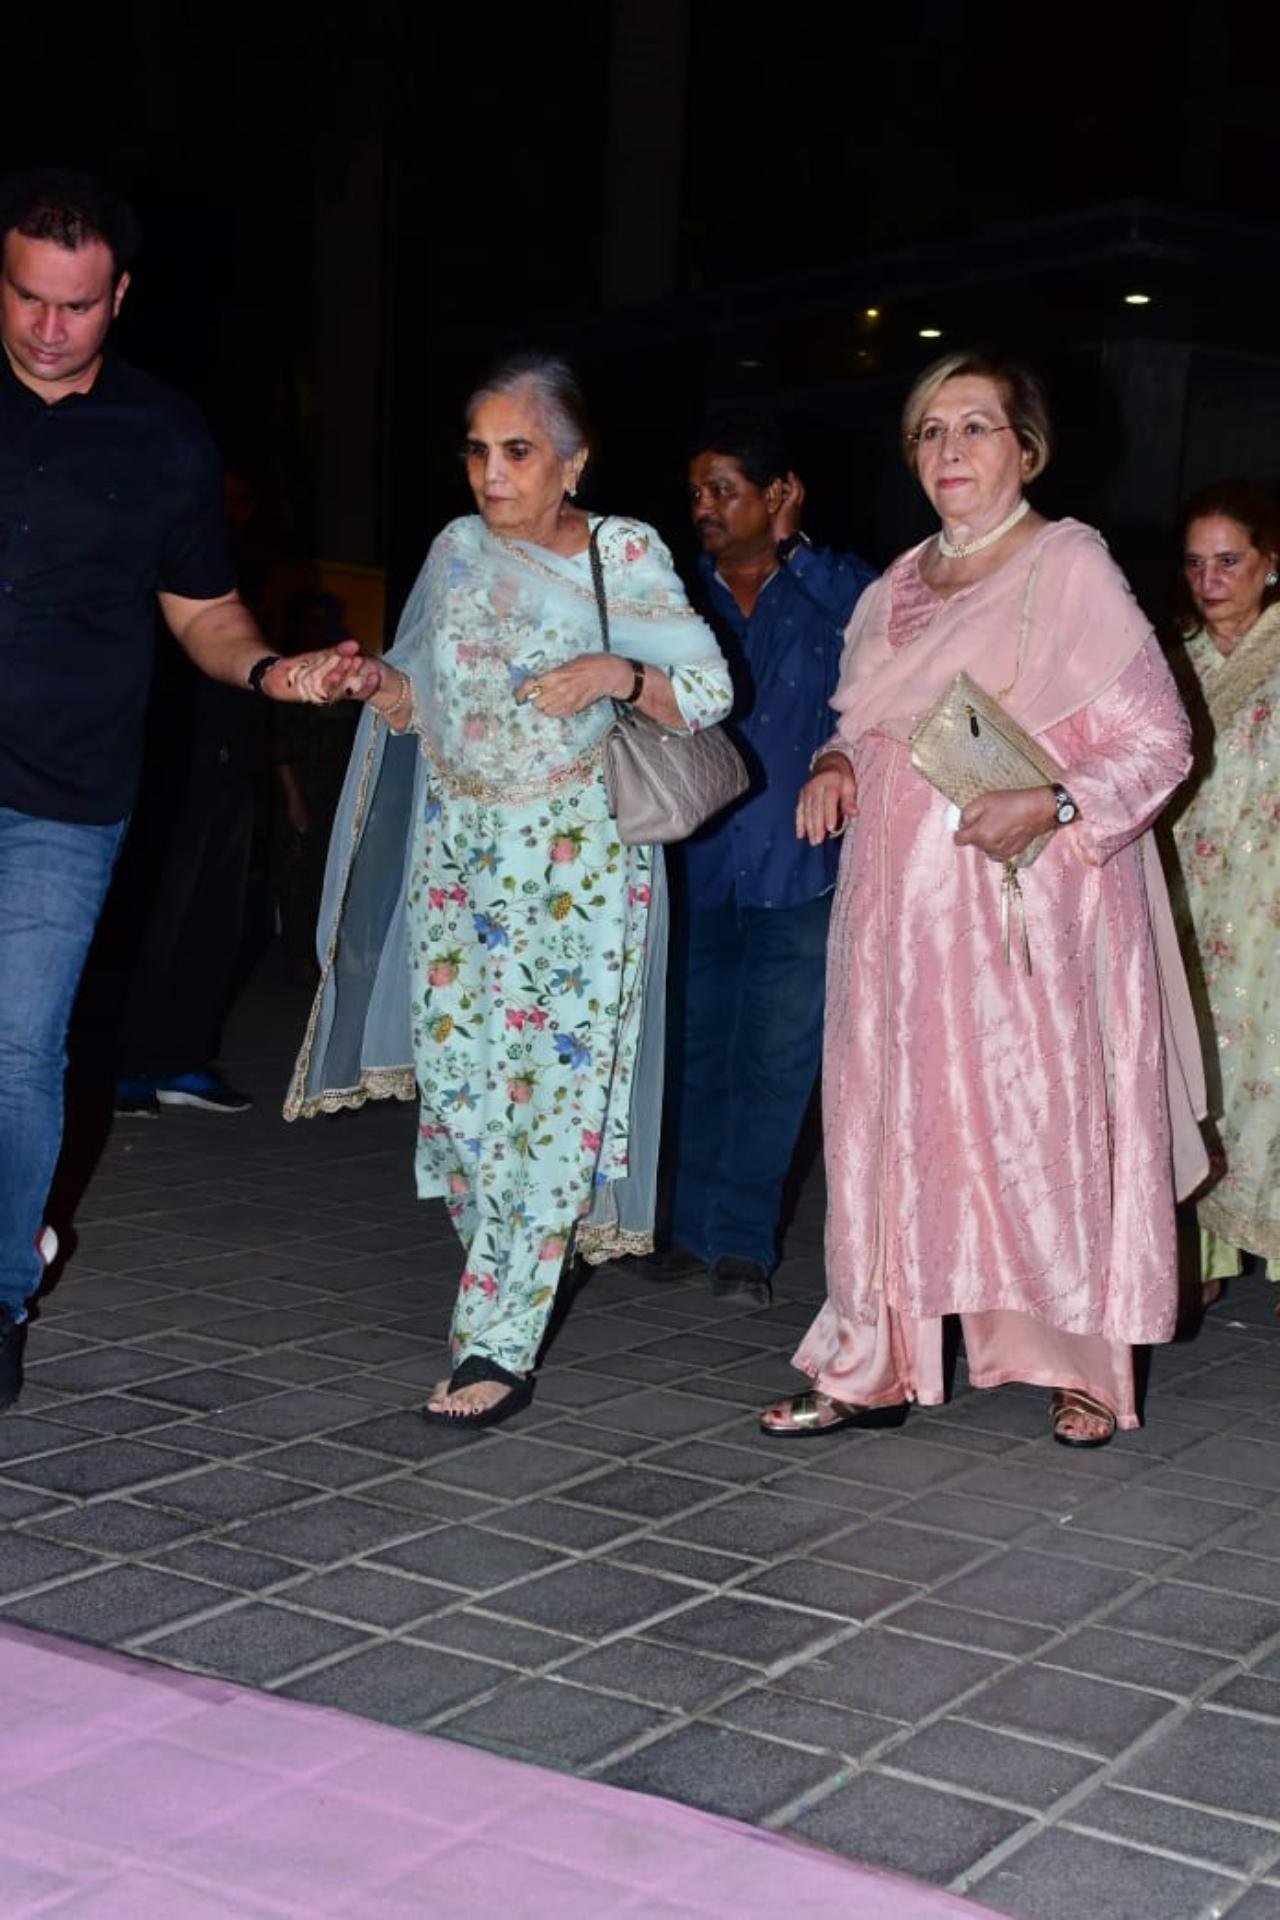 Salman Khan's mother Salma Khan and step-mother Helen arrived together for the party